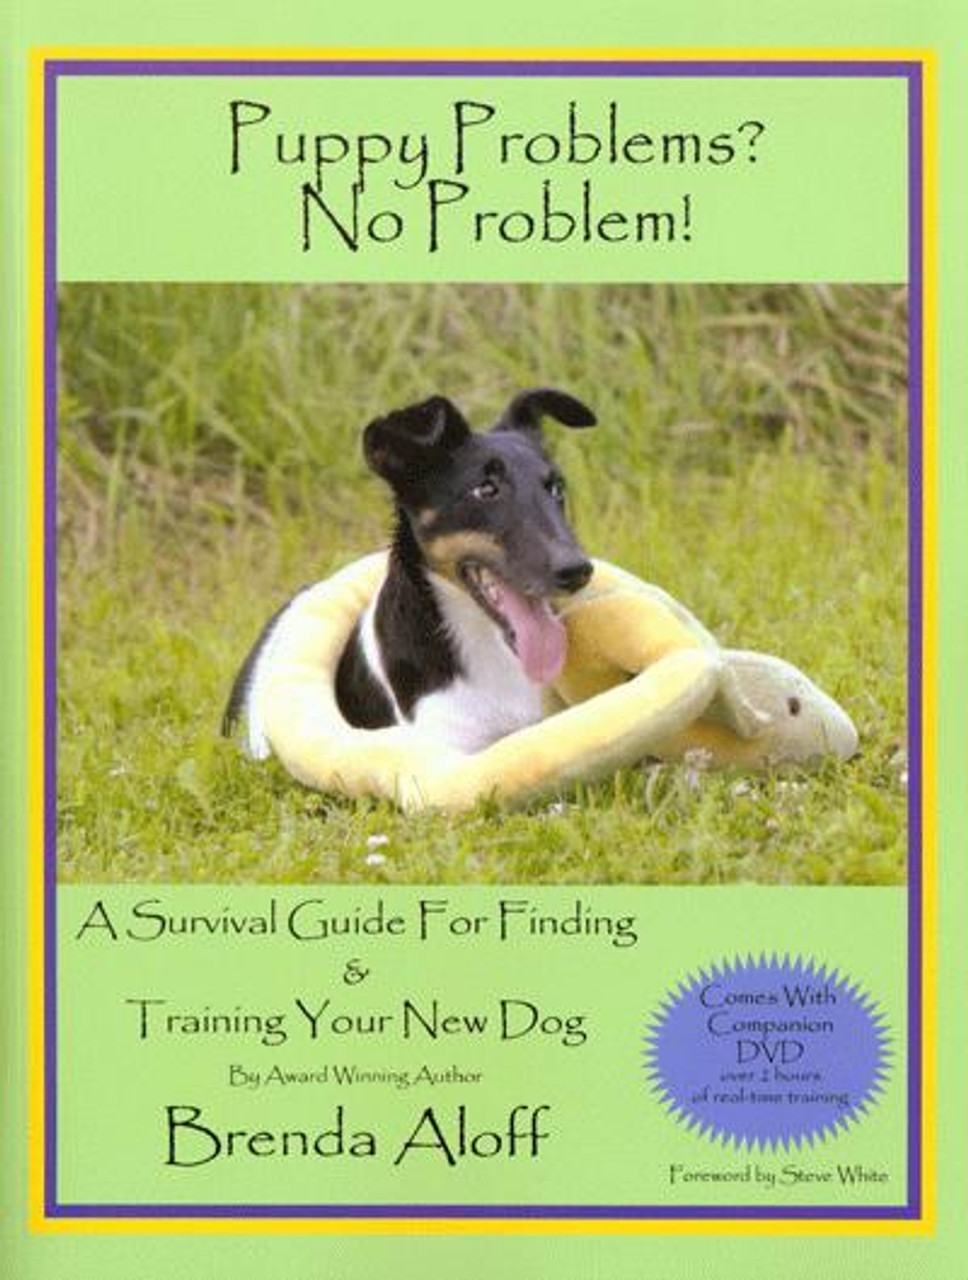 Anxious dog? No worries! 💜 We have the perfect solution for you